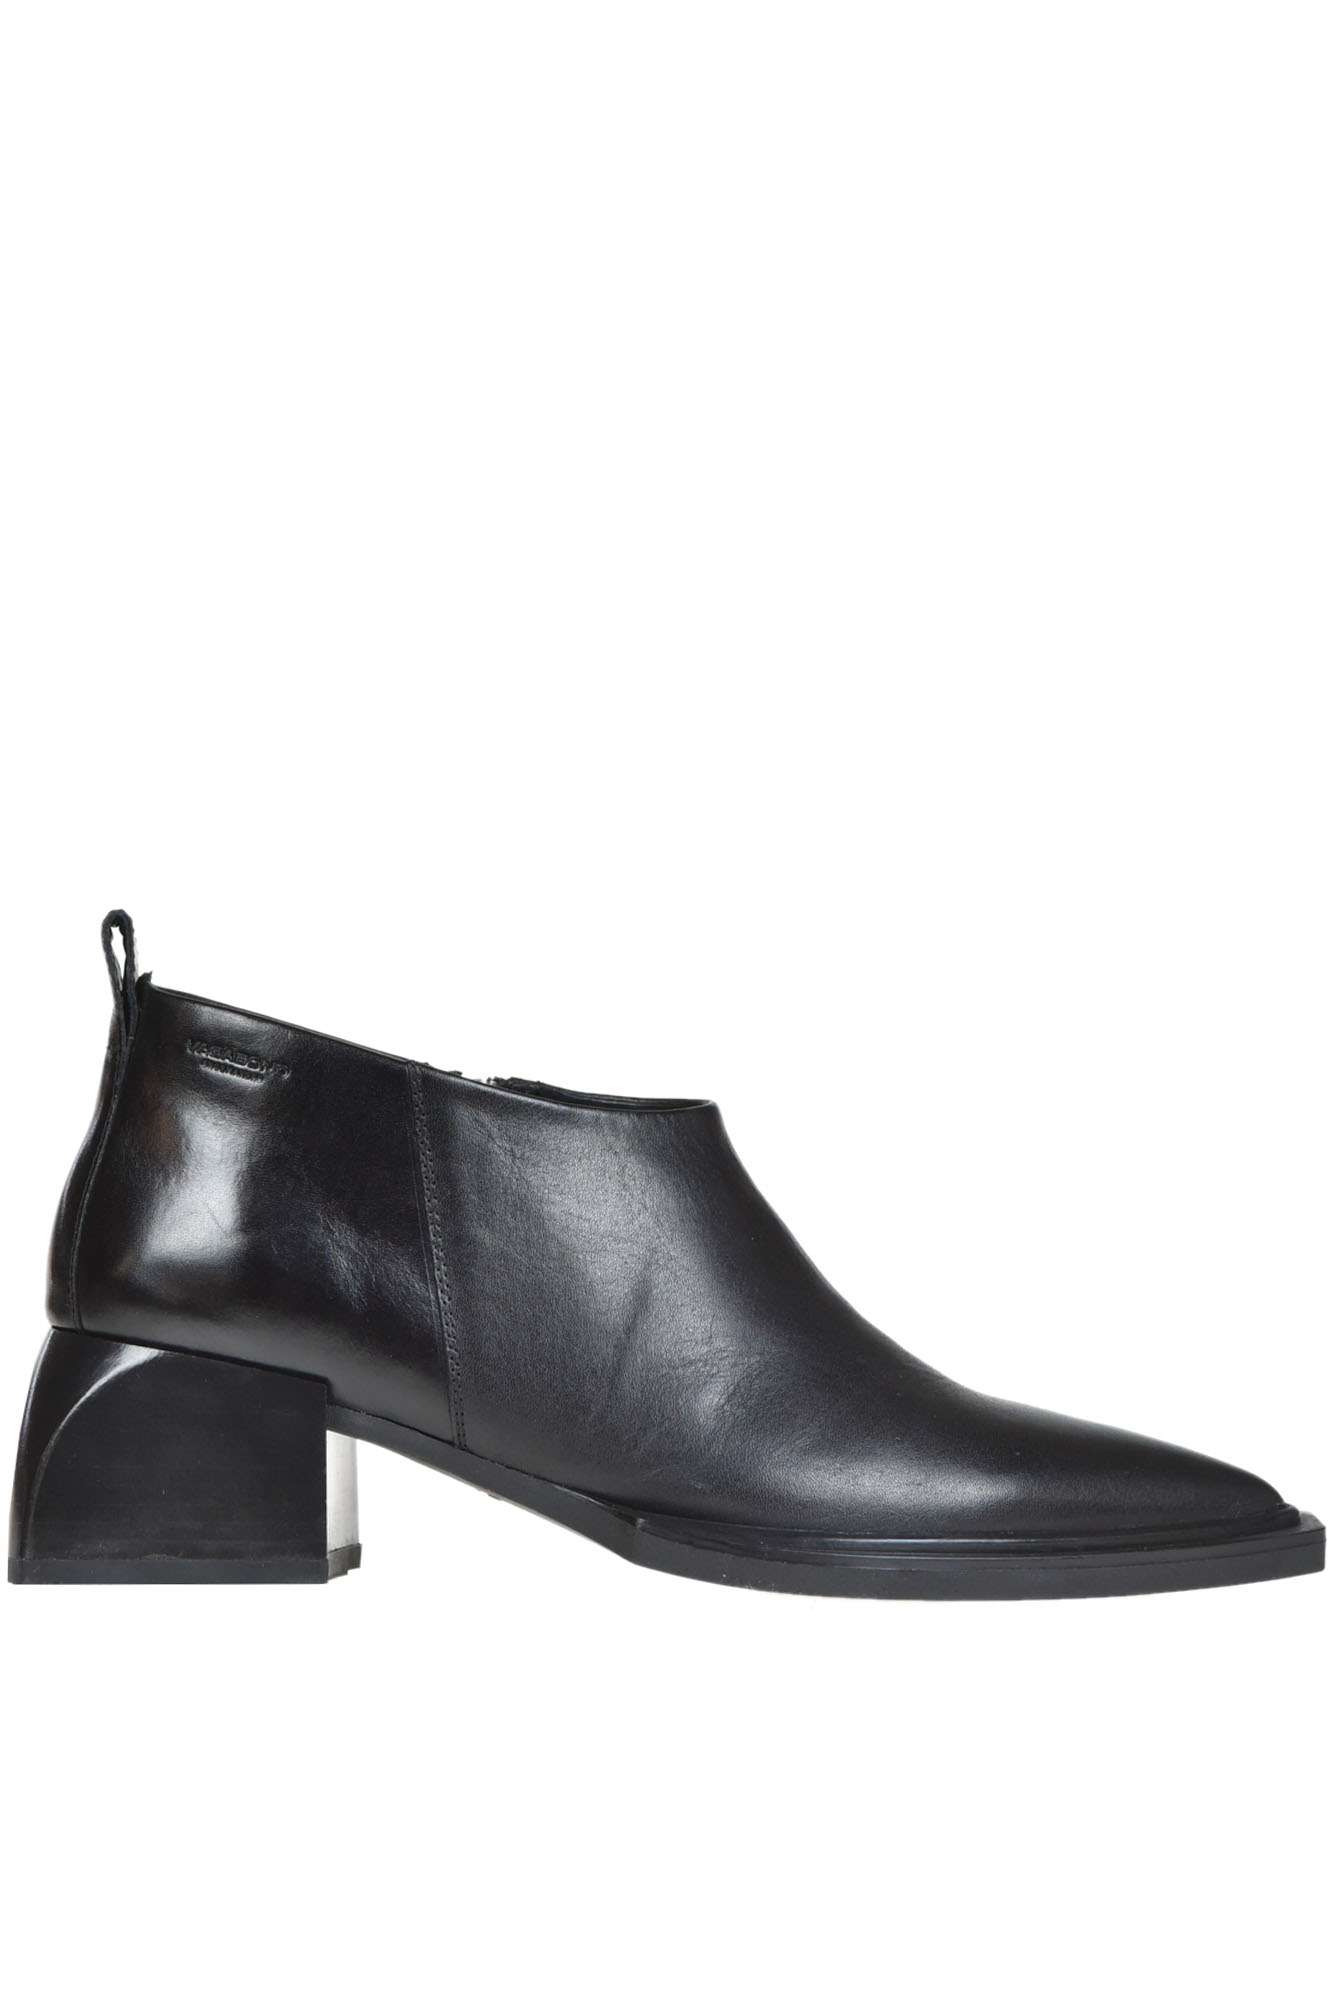 Vagabond Brushed Leather Ankle Boots In Black